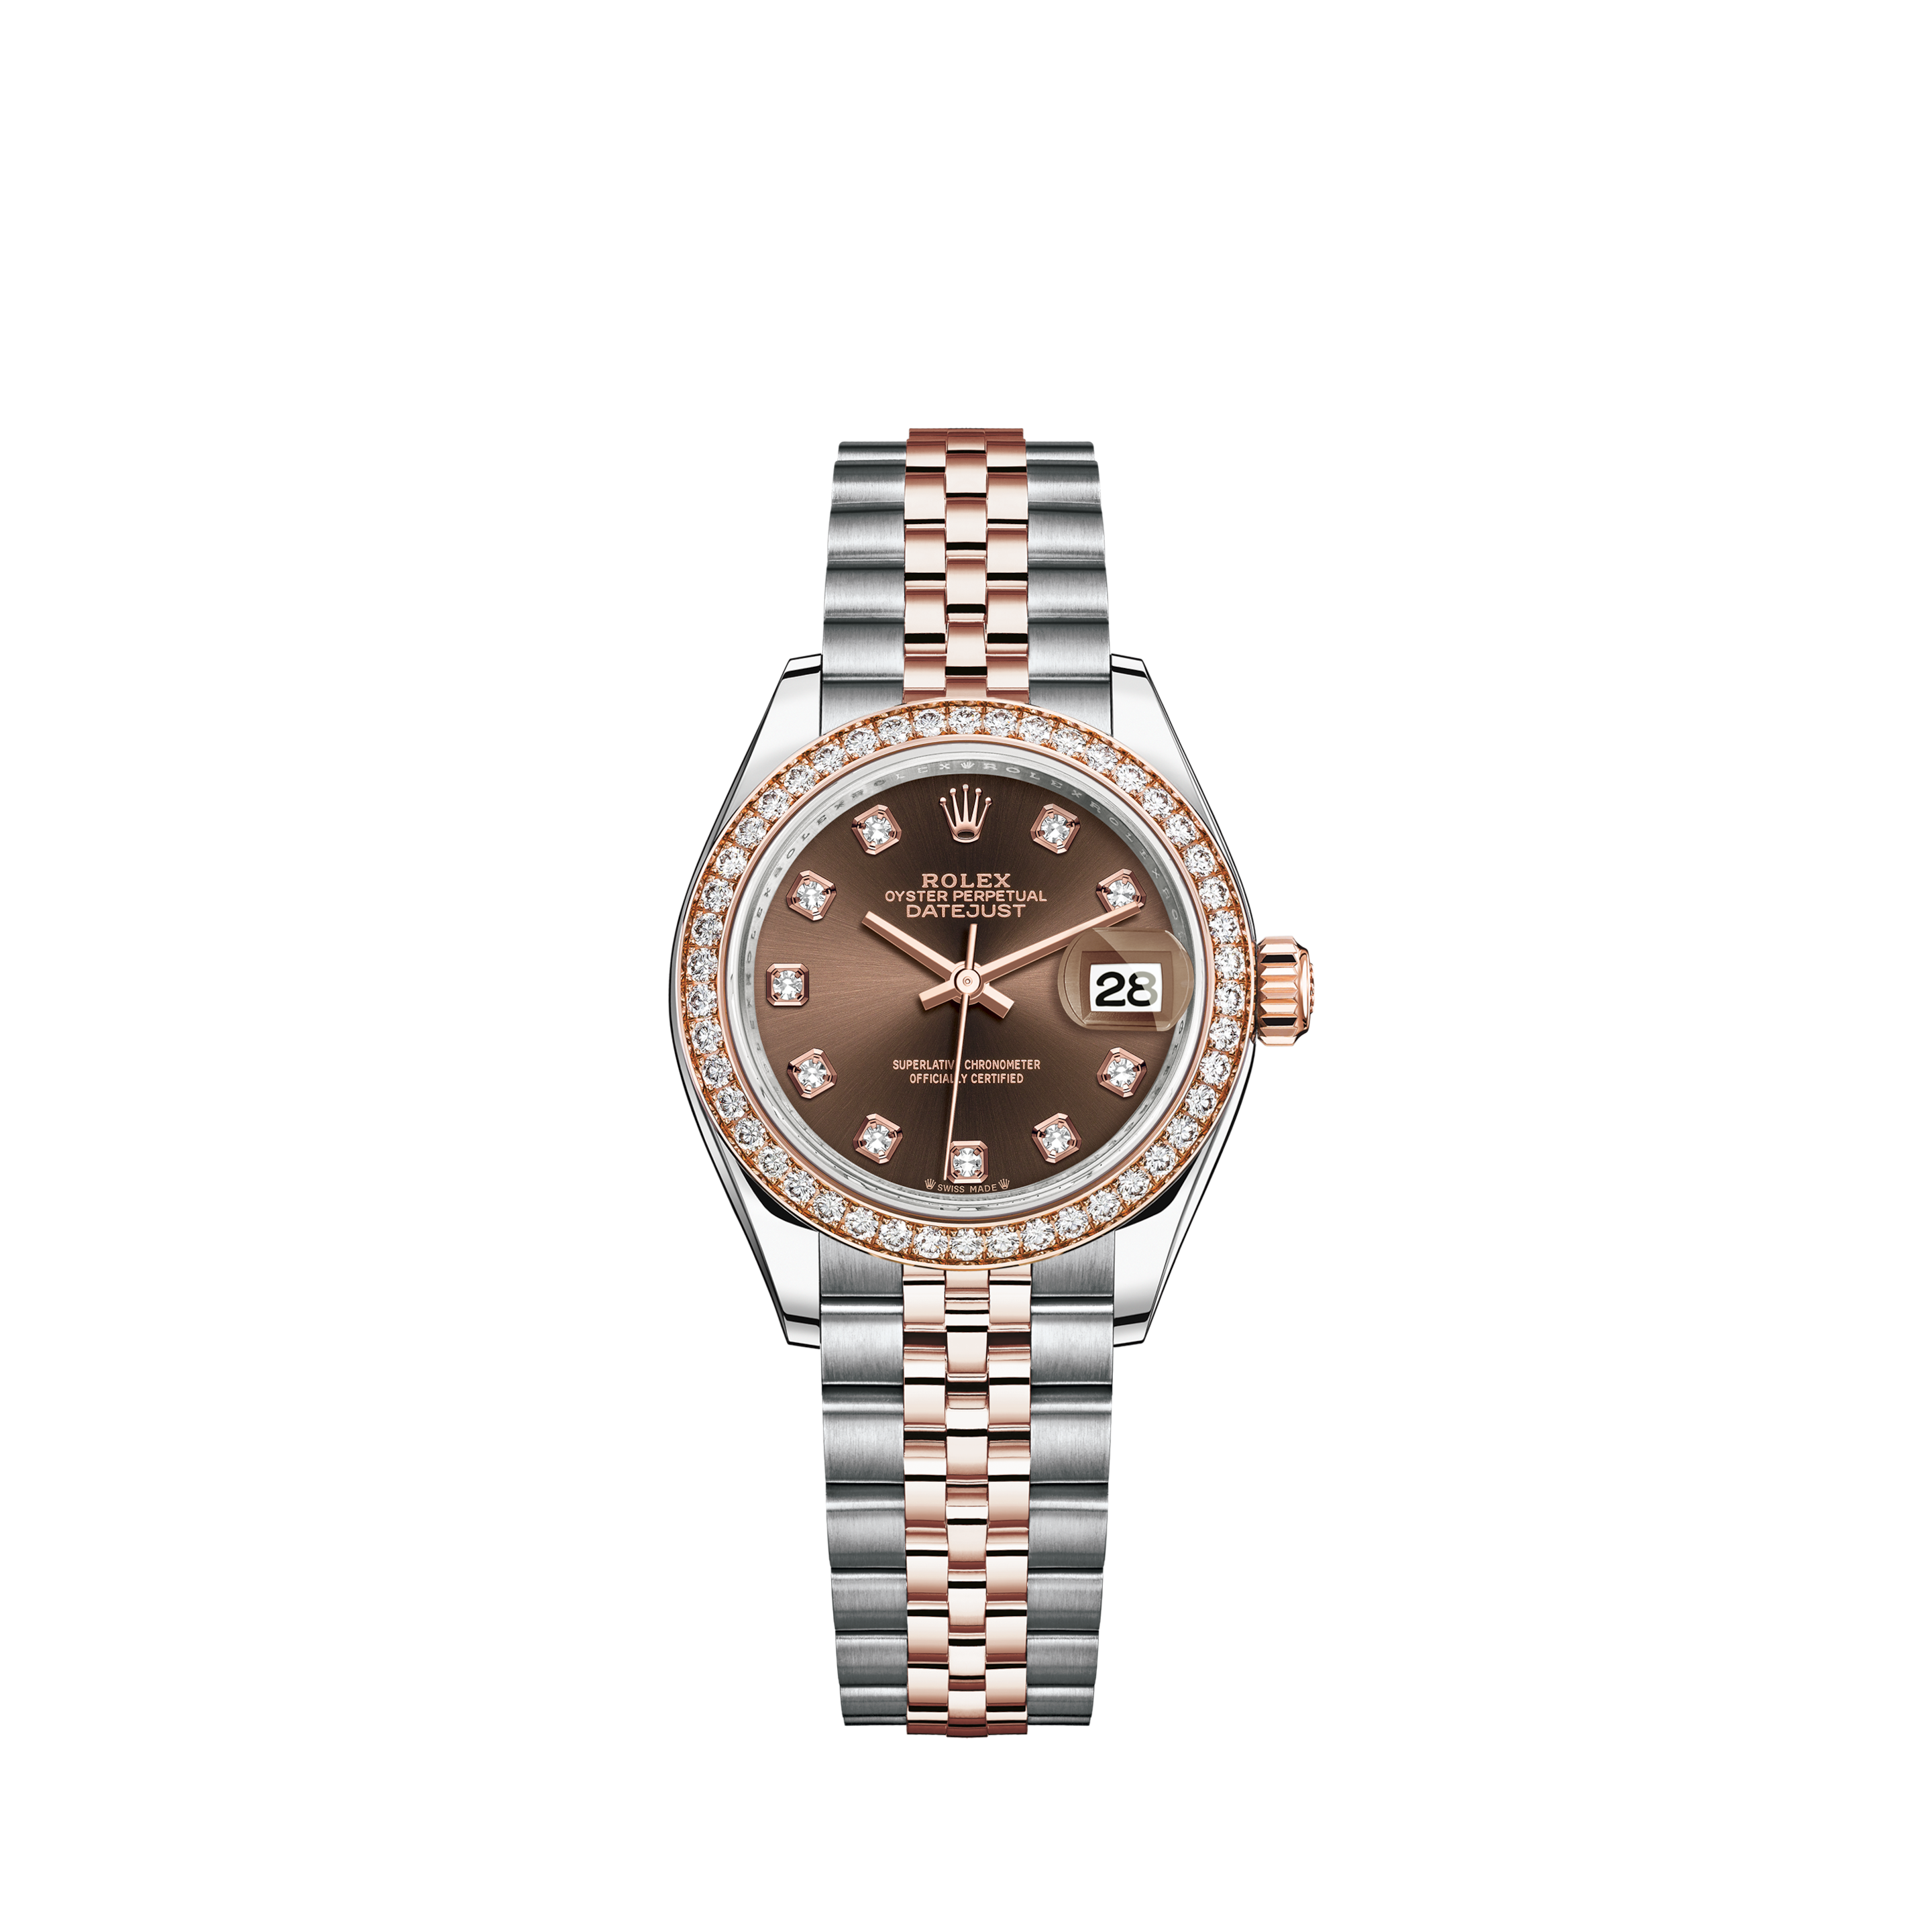 Rolex Ladies Customized Rolex watch 26mm Datejust Stainless Steel Dark Grey Color Dial with Diamond AccentRolex Ladies Customized Rolex watch 26mm Datejust Stainless Steel Diamond Dial with Silver Jubilee Metal Plate